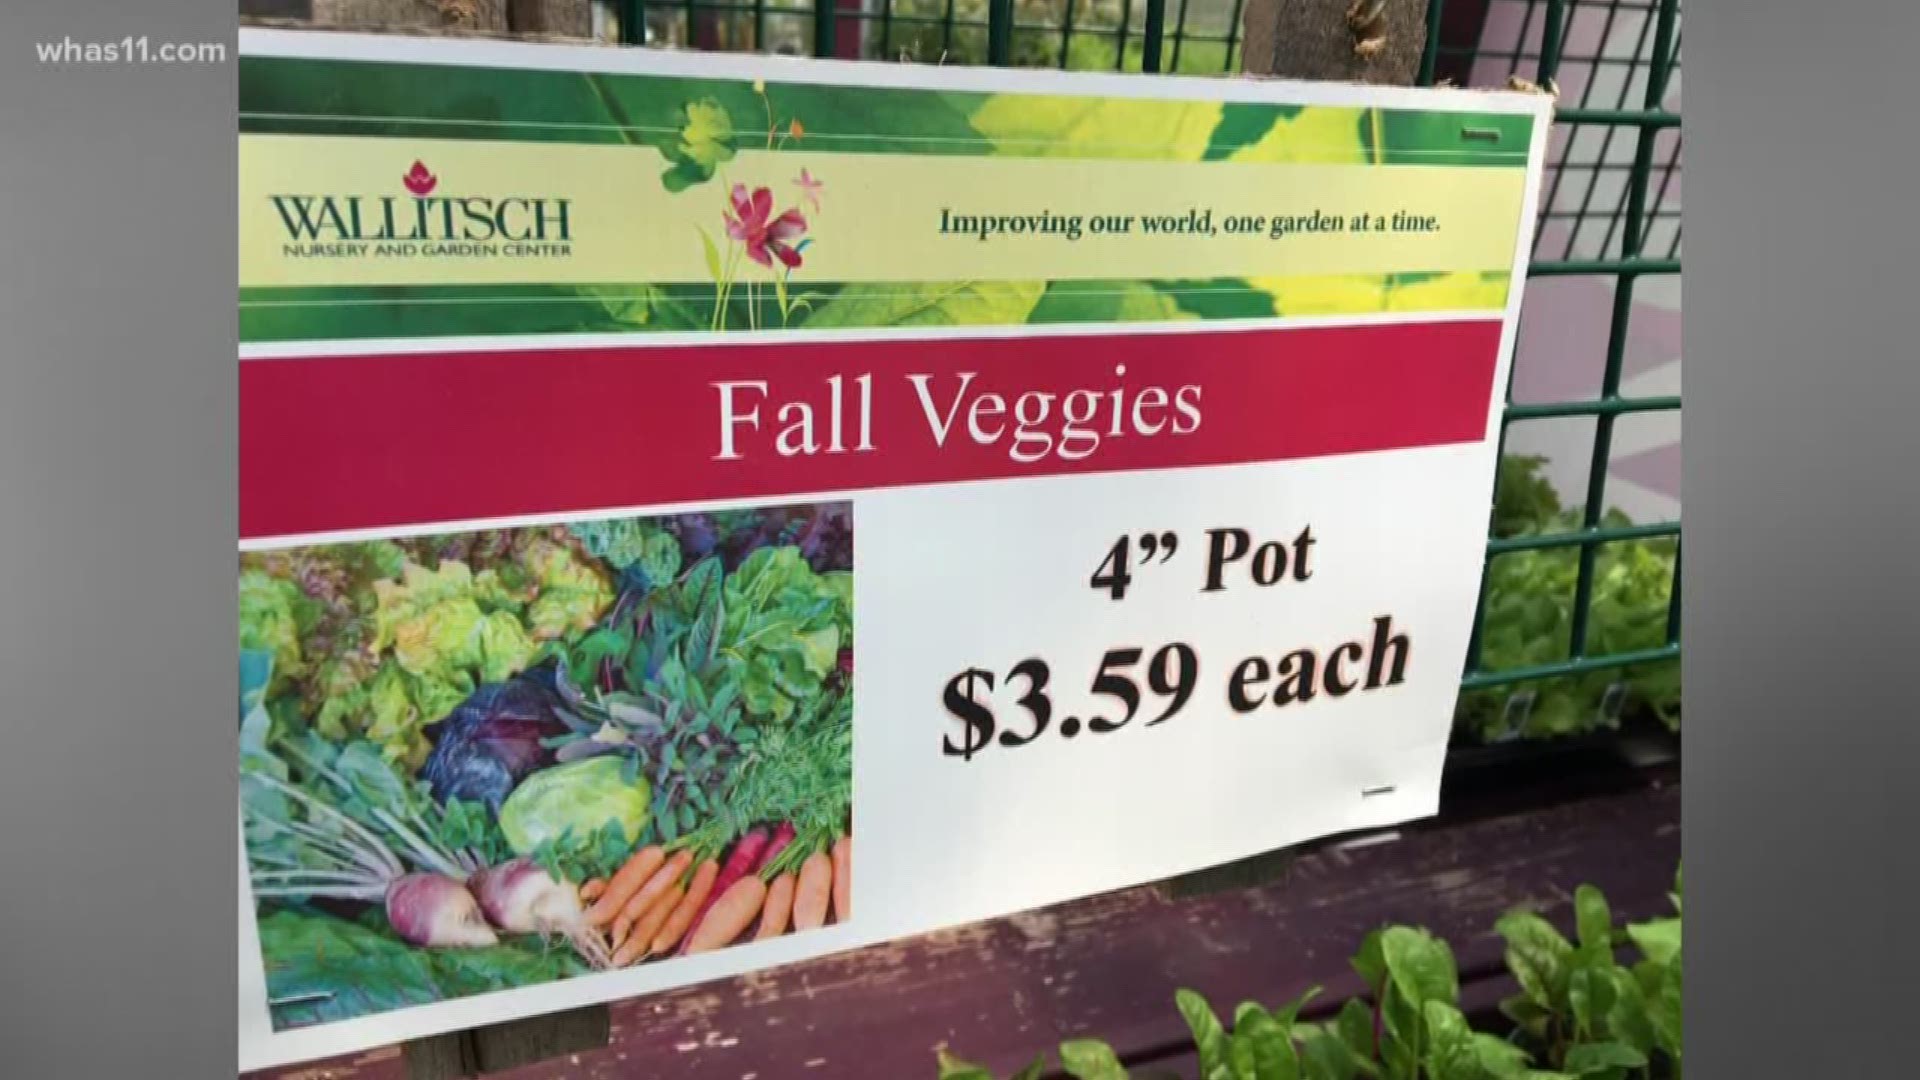 Now is the time to plant your fall vegetables. Jeff Wallitsch from Wallitsch Garden shares his tips with Meteorologist Ben Pine